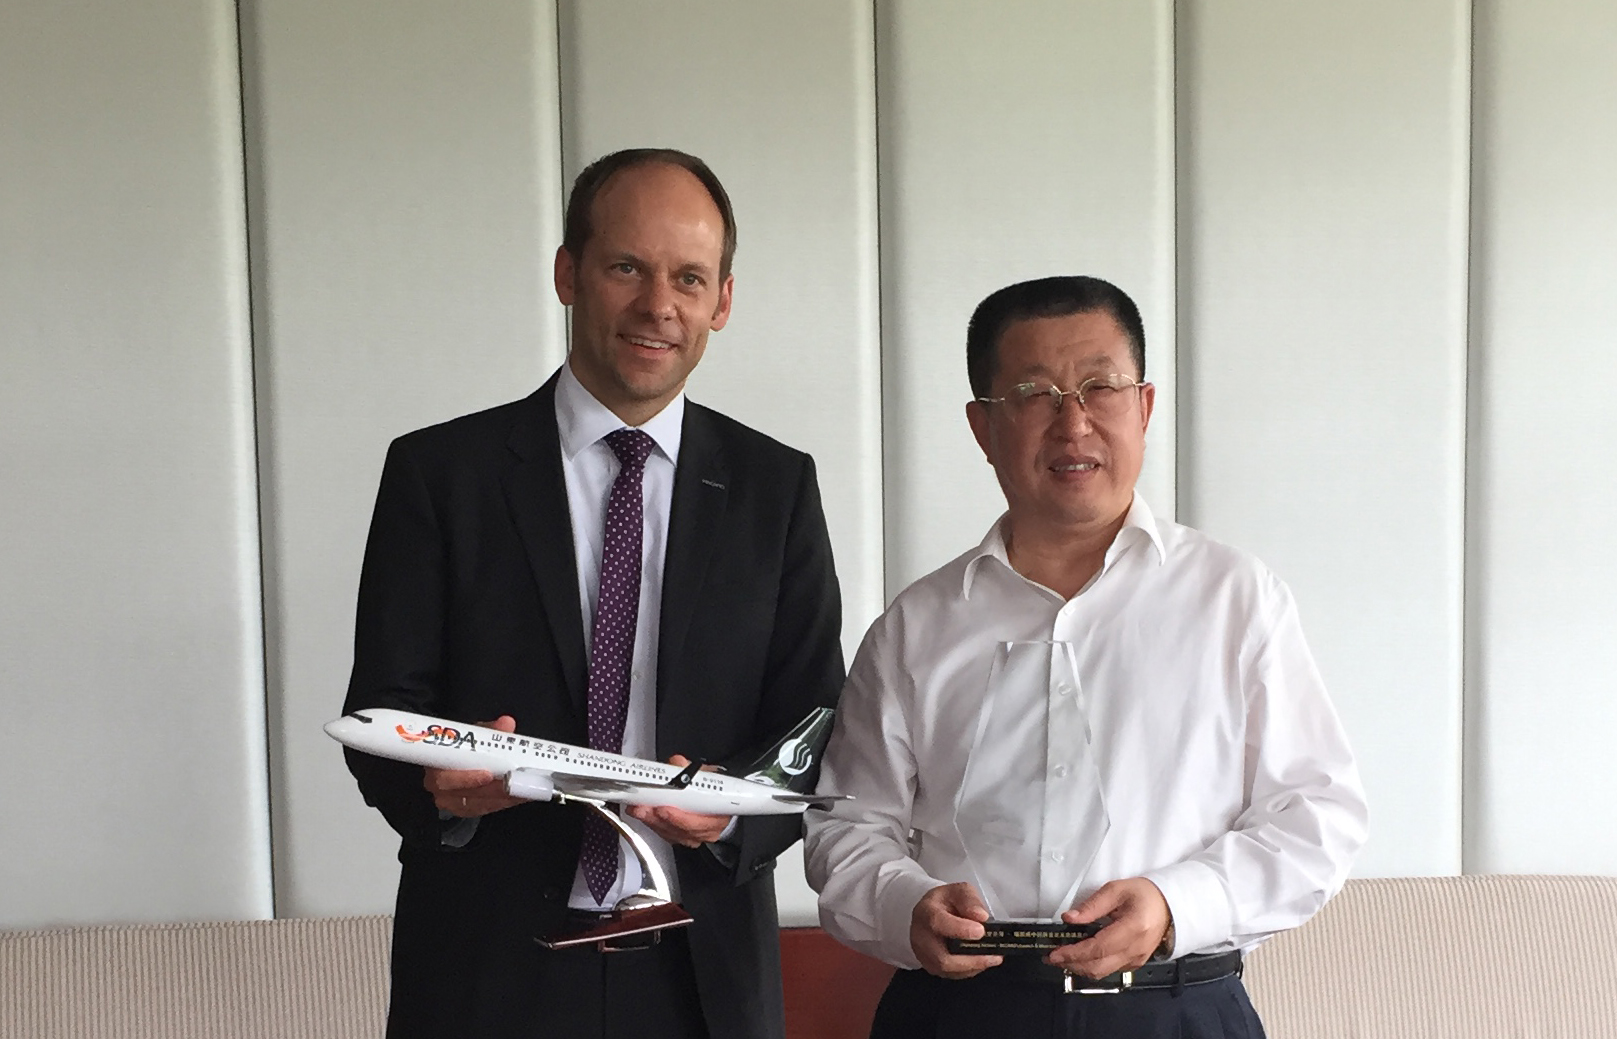 Shandong Airlines orders 6,000 seats for its new Boeing 737 MAX fleet